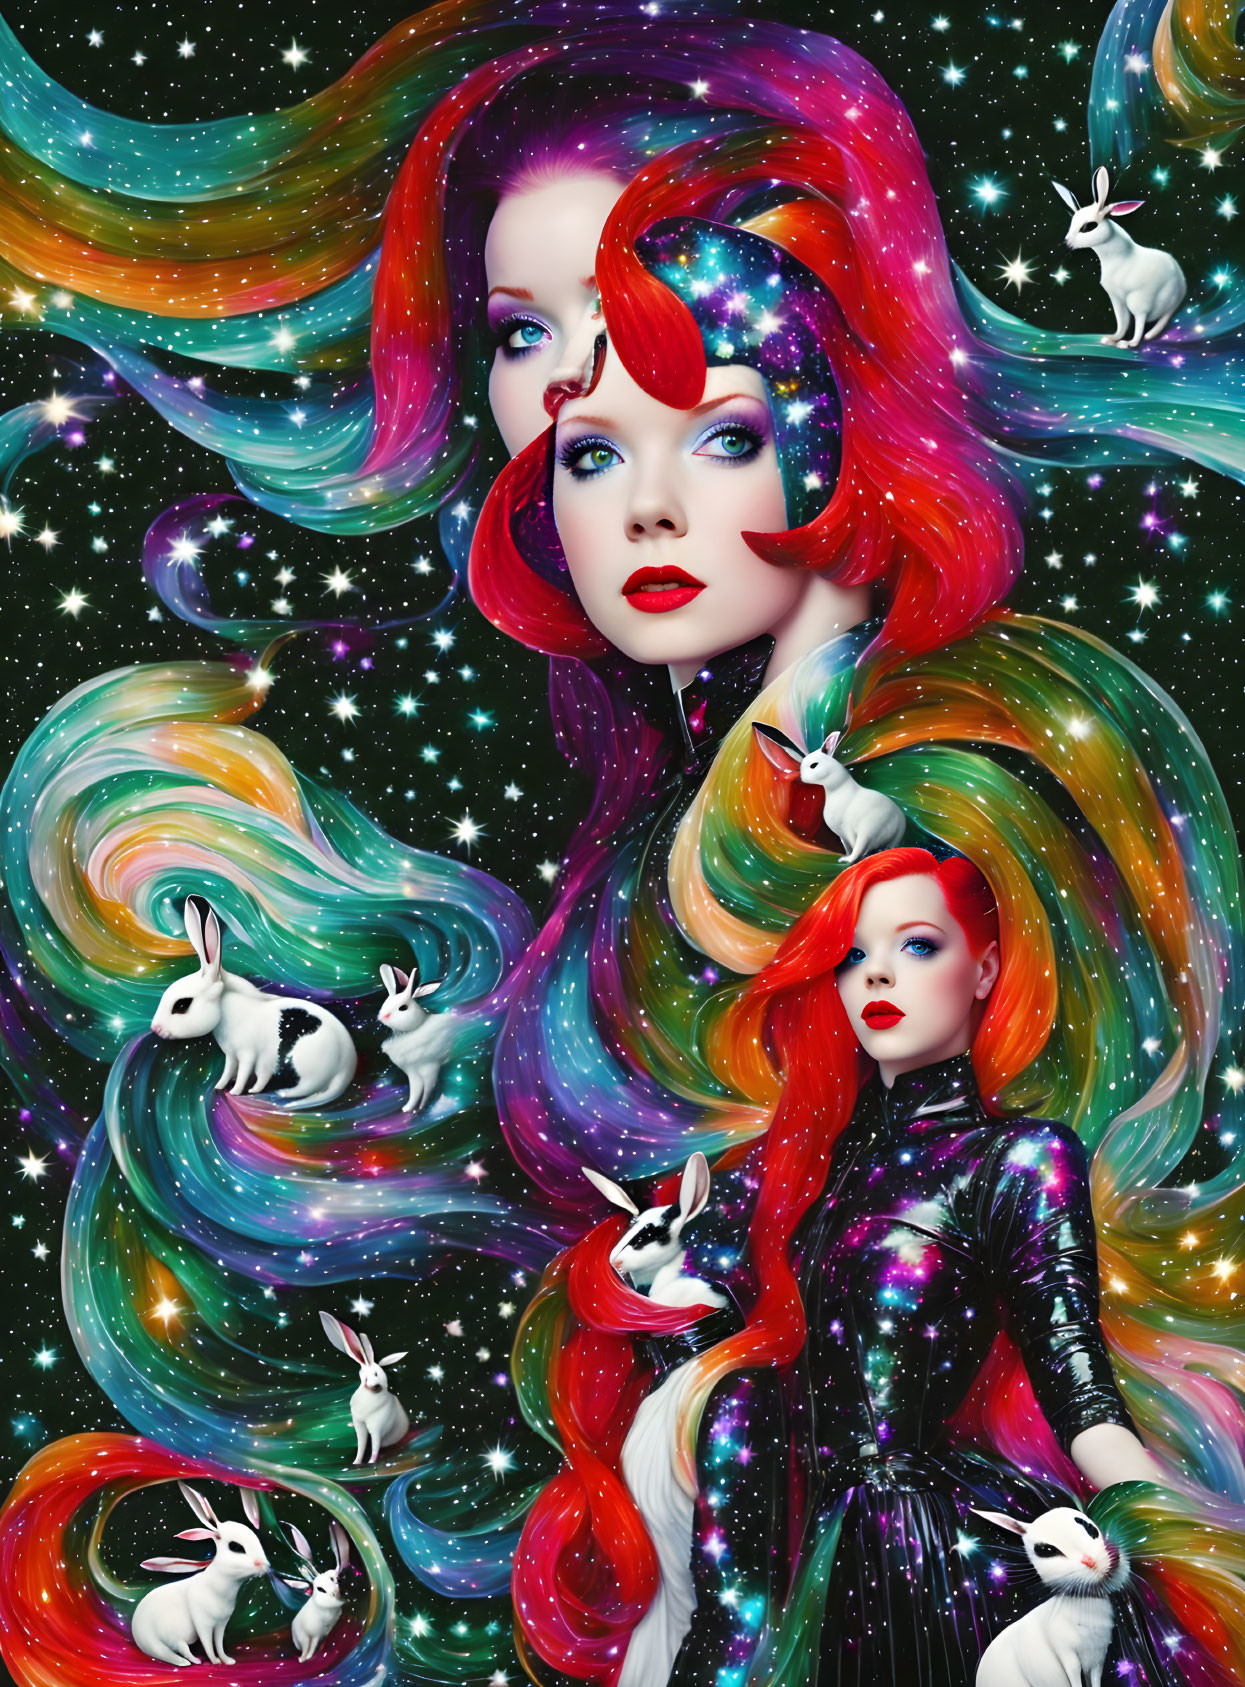 Vibrant space-themed digital art with flowing hair, stars, and rabbits